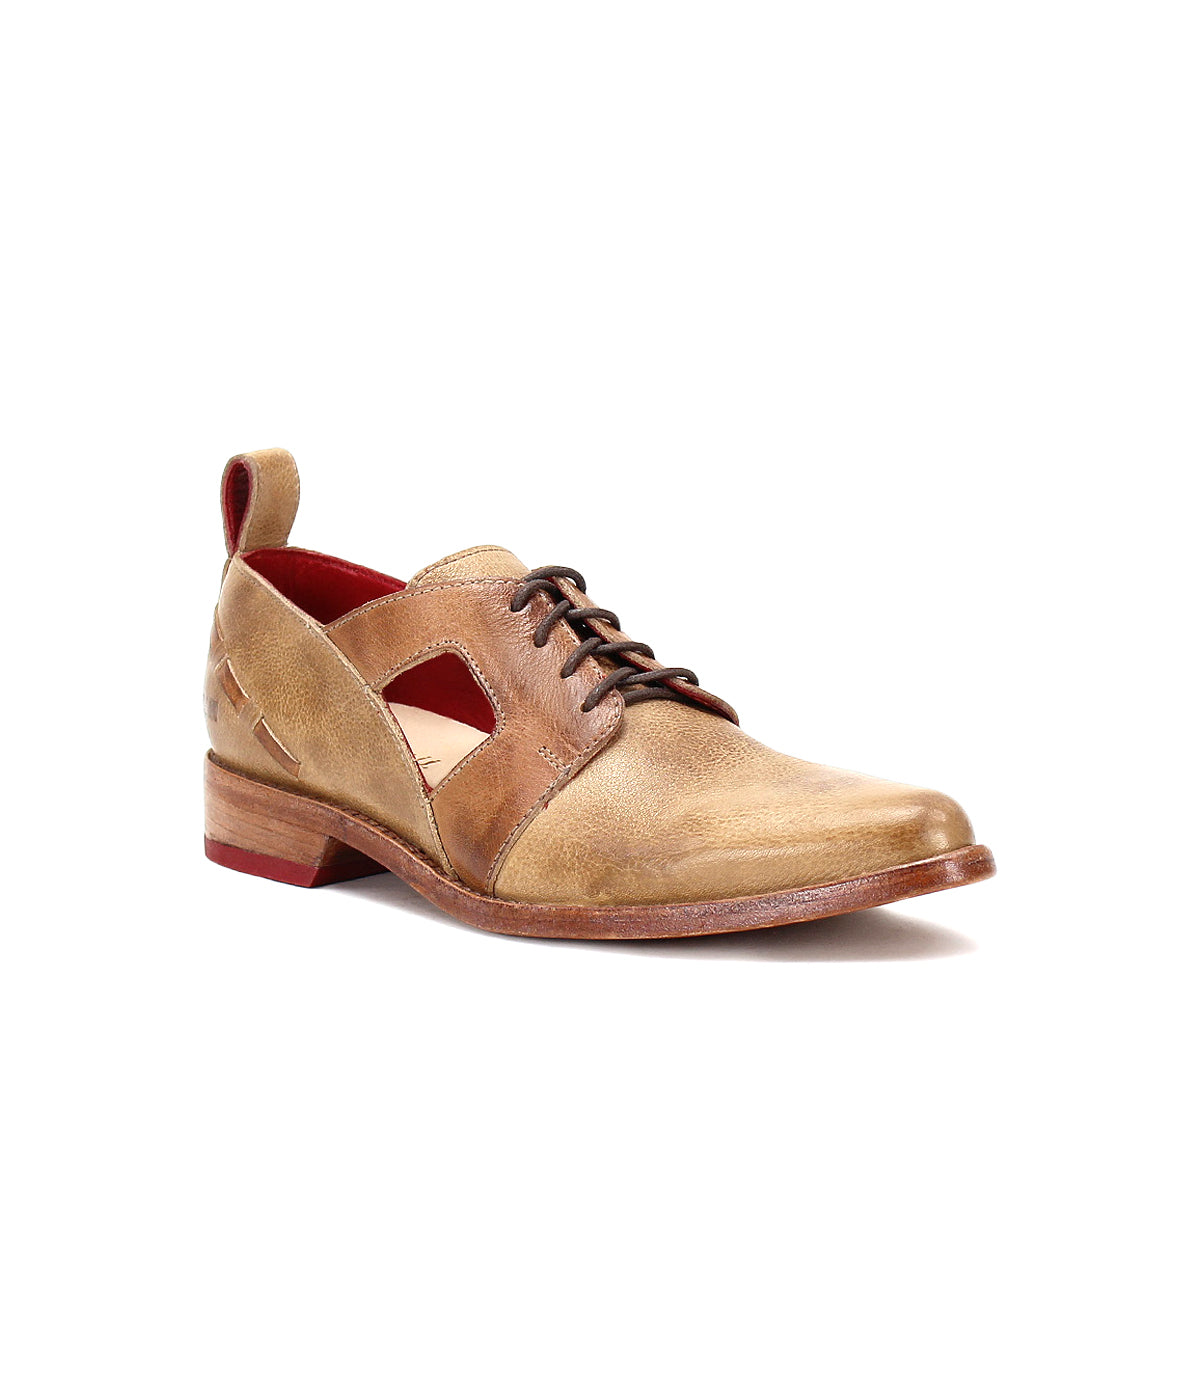 A single brown leather Bed Stu dress shoe with a pointed toe lace-up design against a white background.